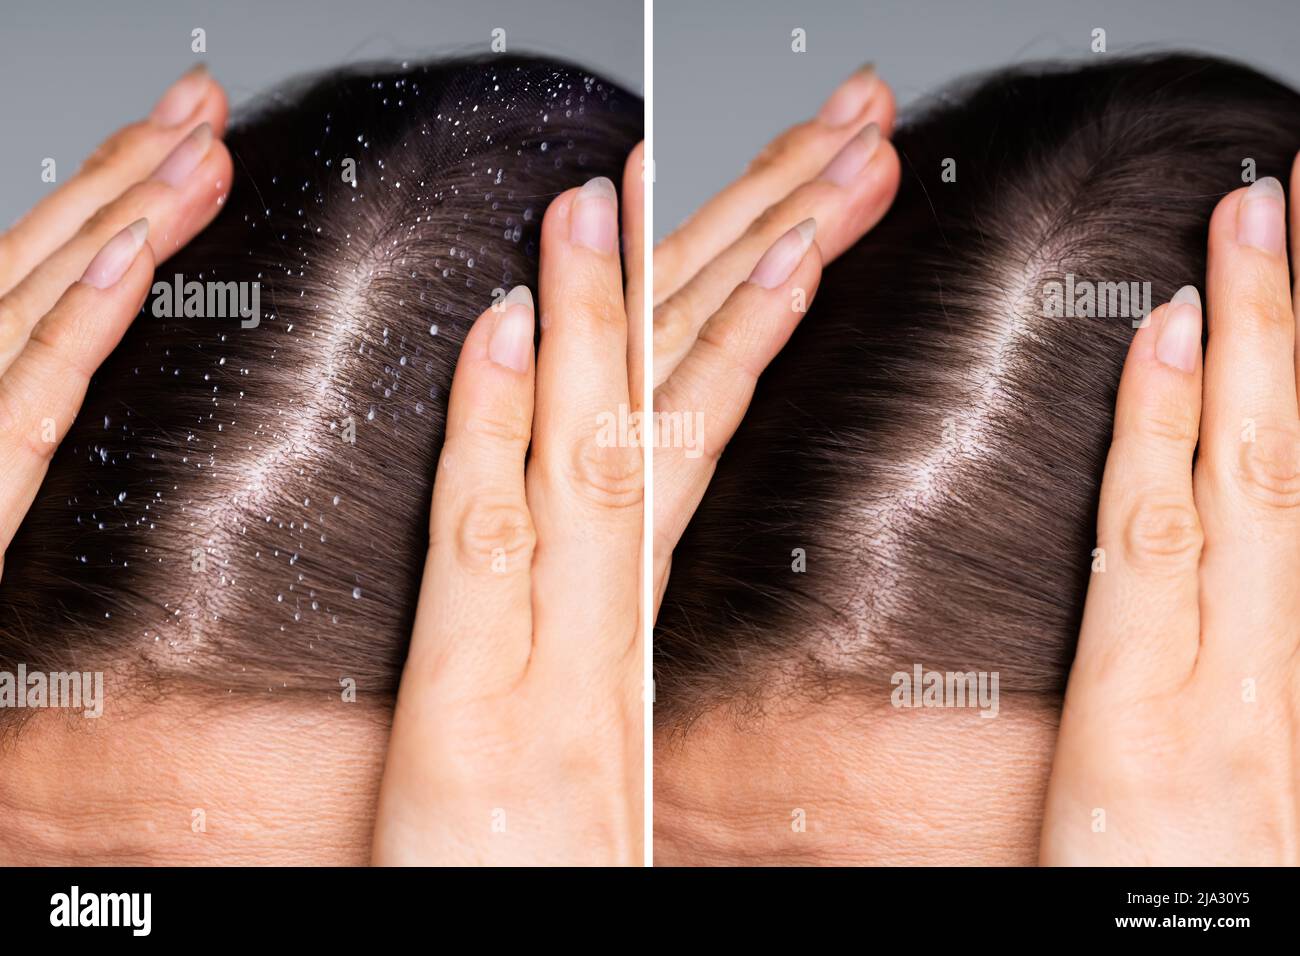 Difference Of Hair With Dandruff And Clean Hair Stock Photo